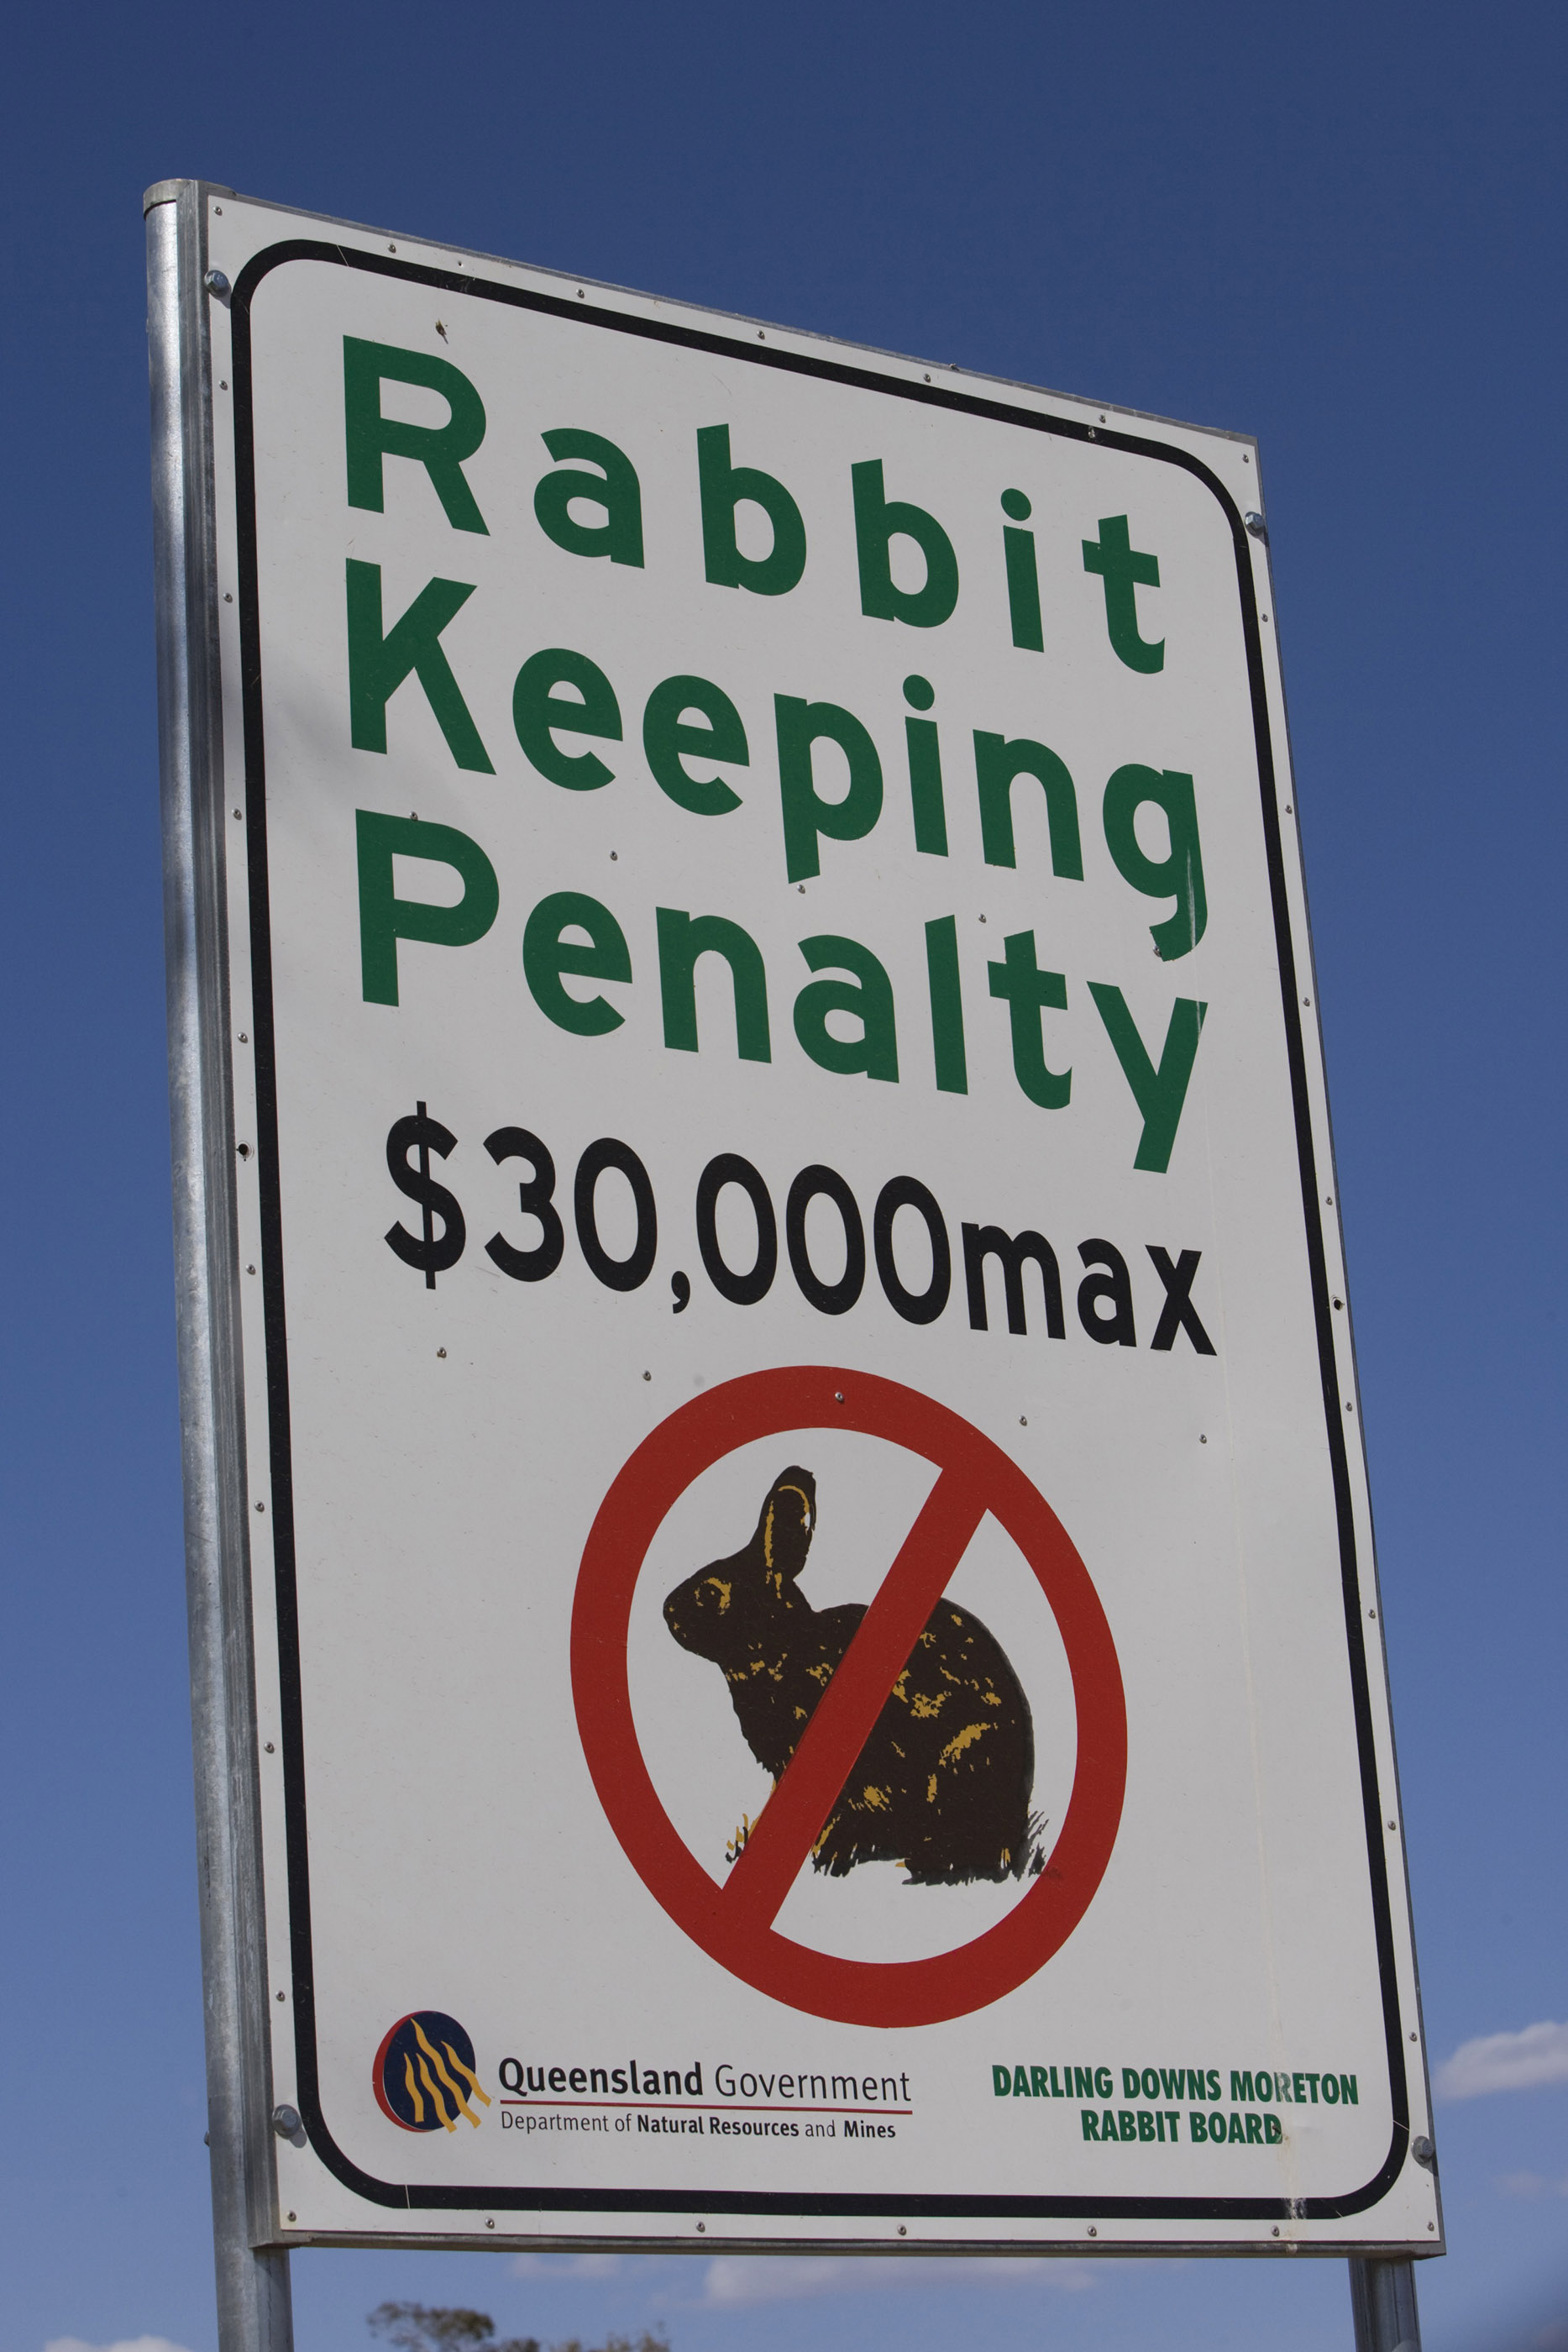 Rabbit penalty road sign near Hebel, New South Wales.